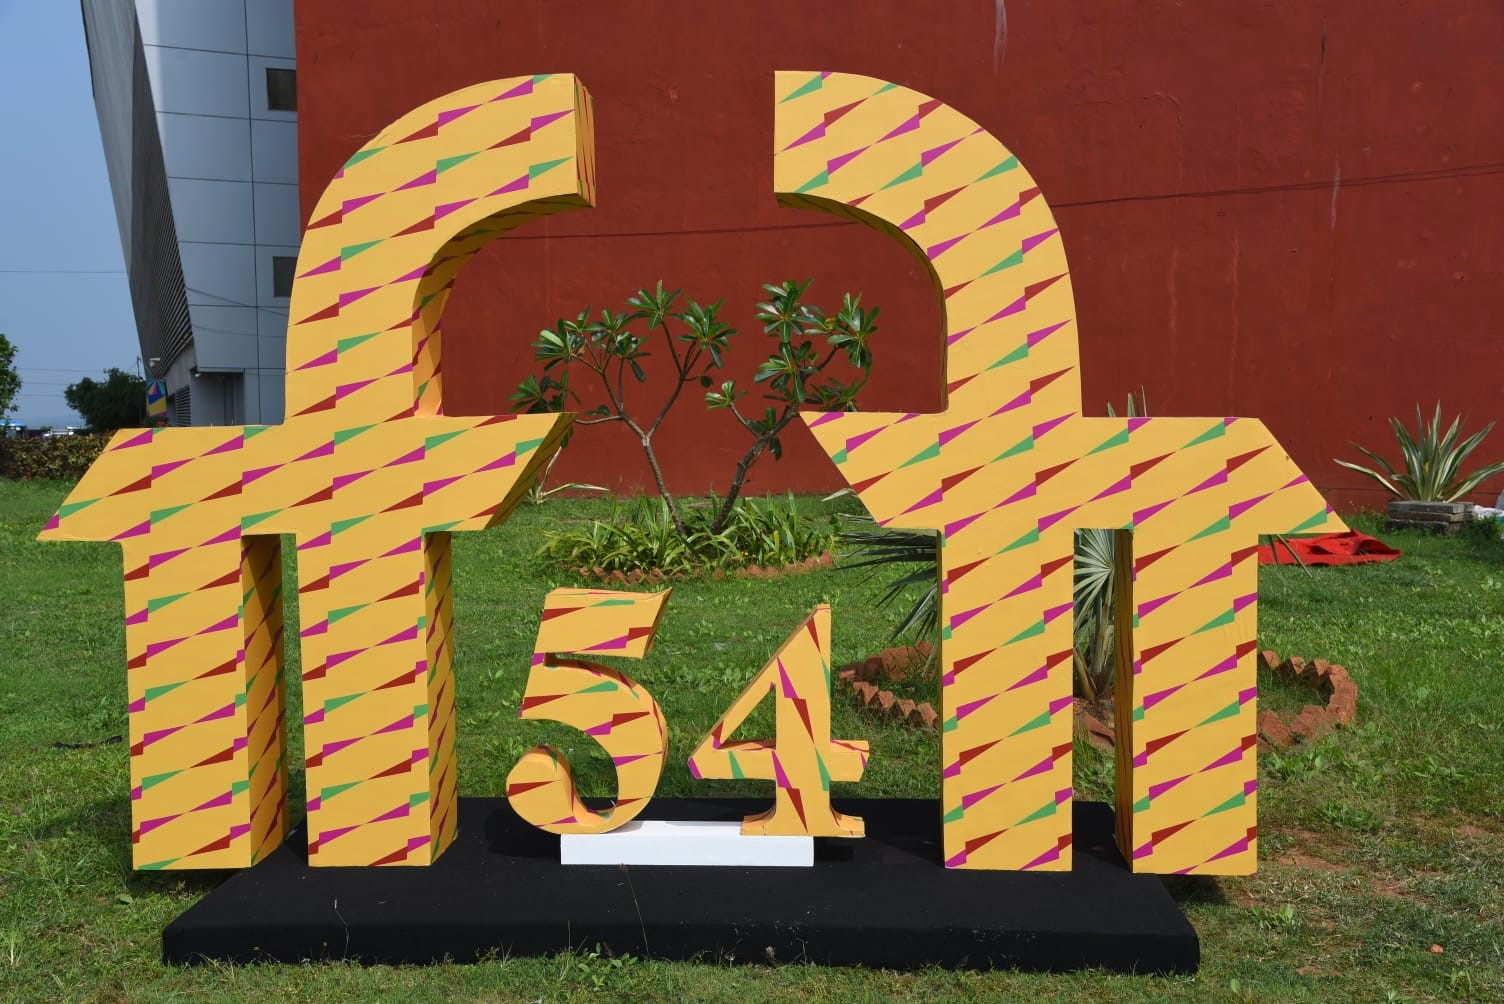 The 54th International Film Festival of India (IFFI) will begin with a grand opening ceremony on Sunday.